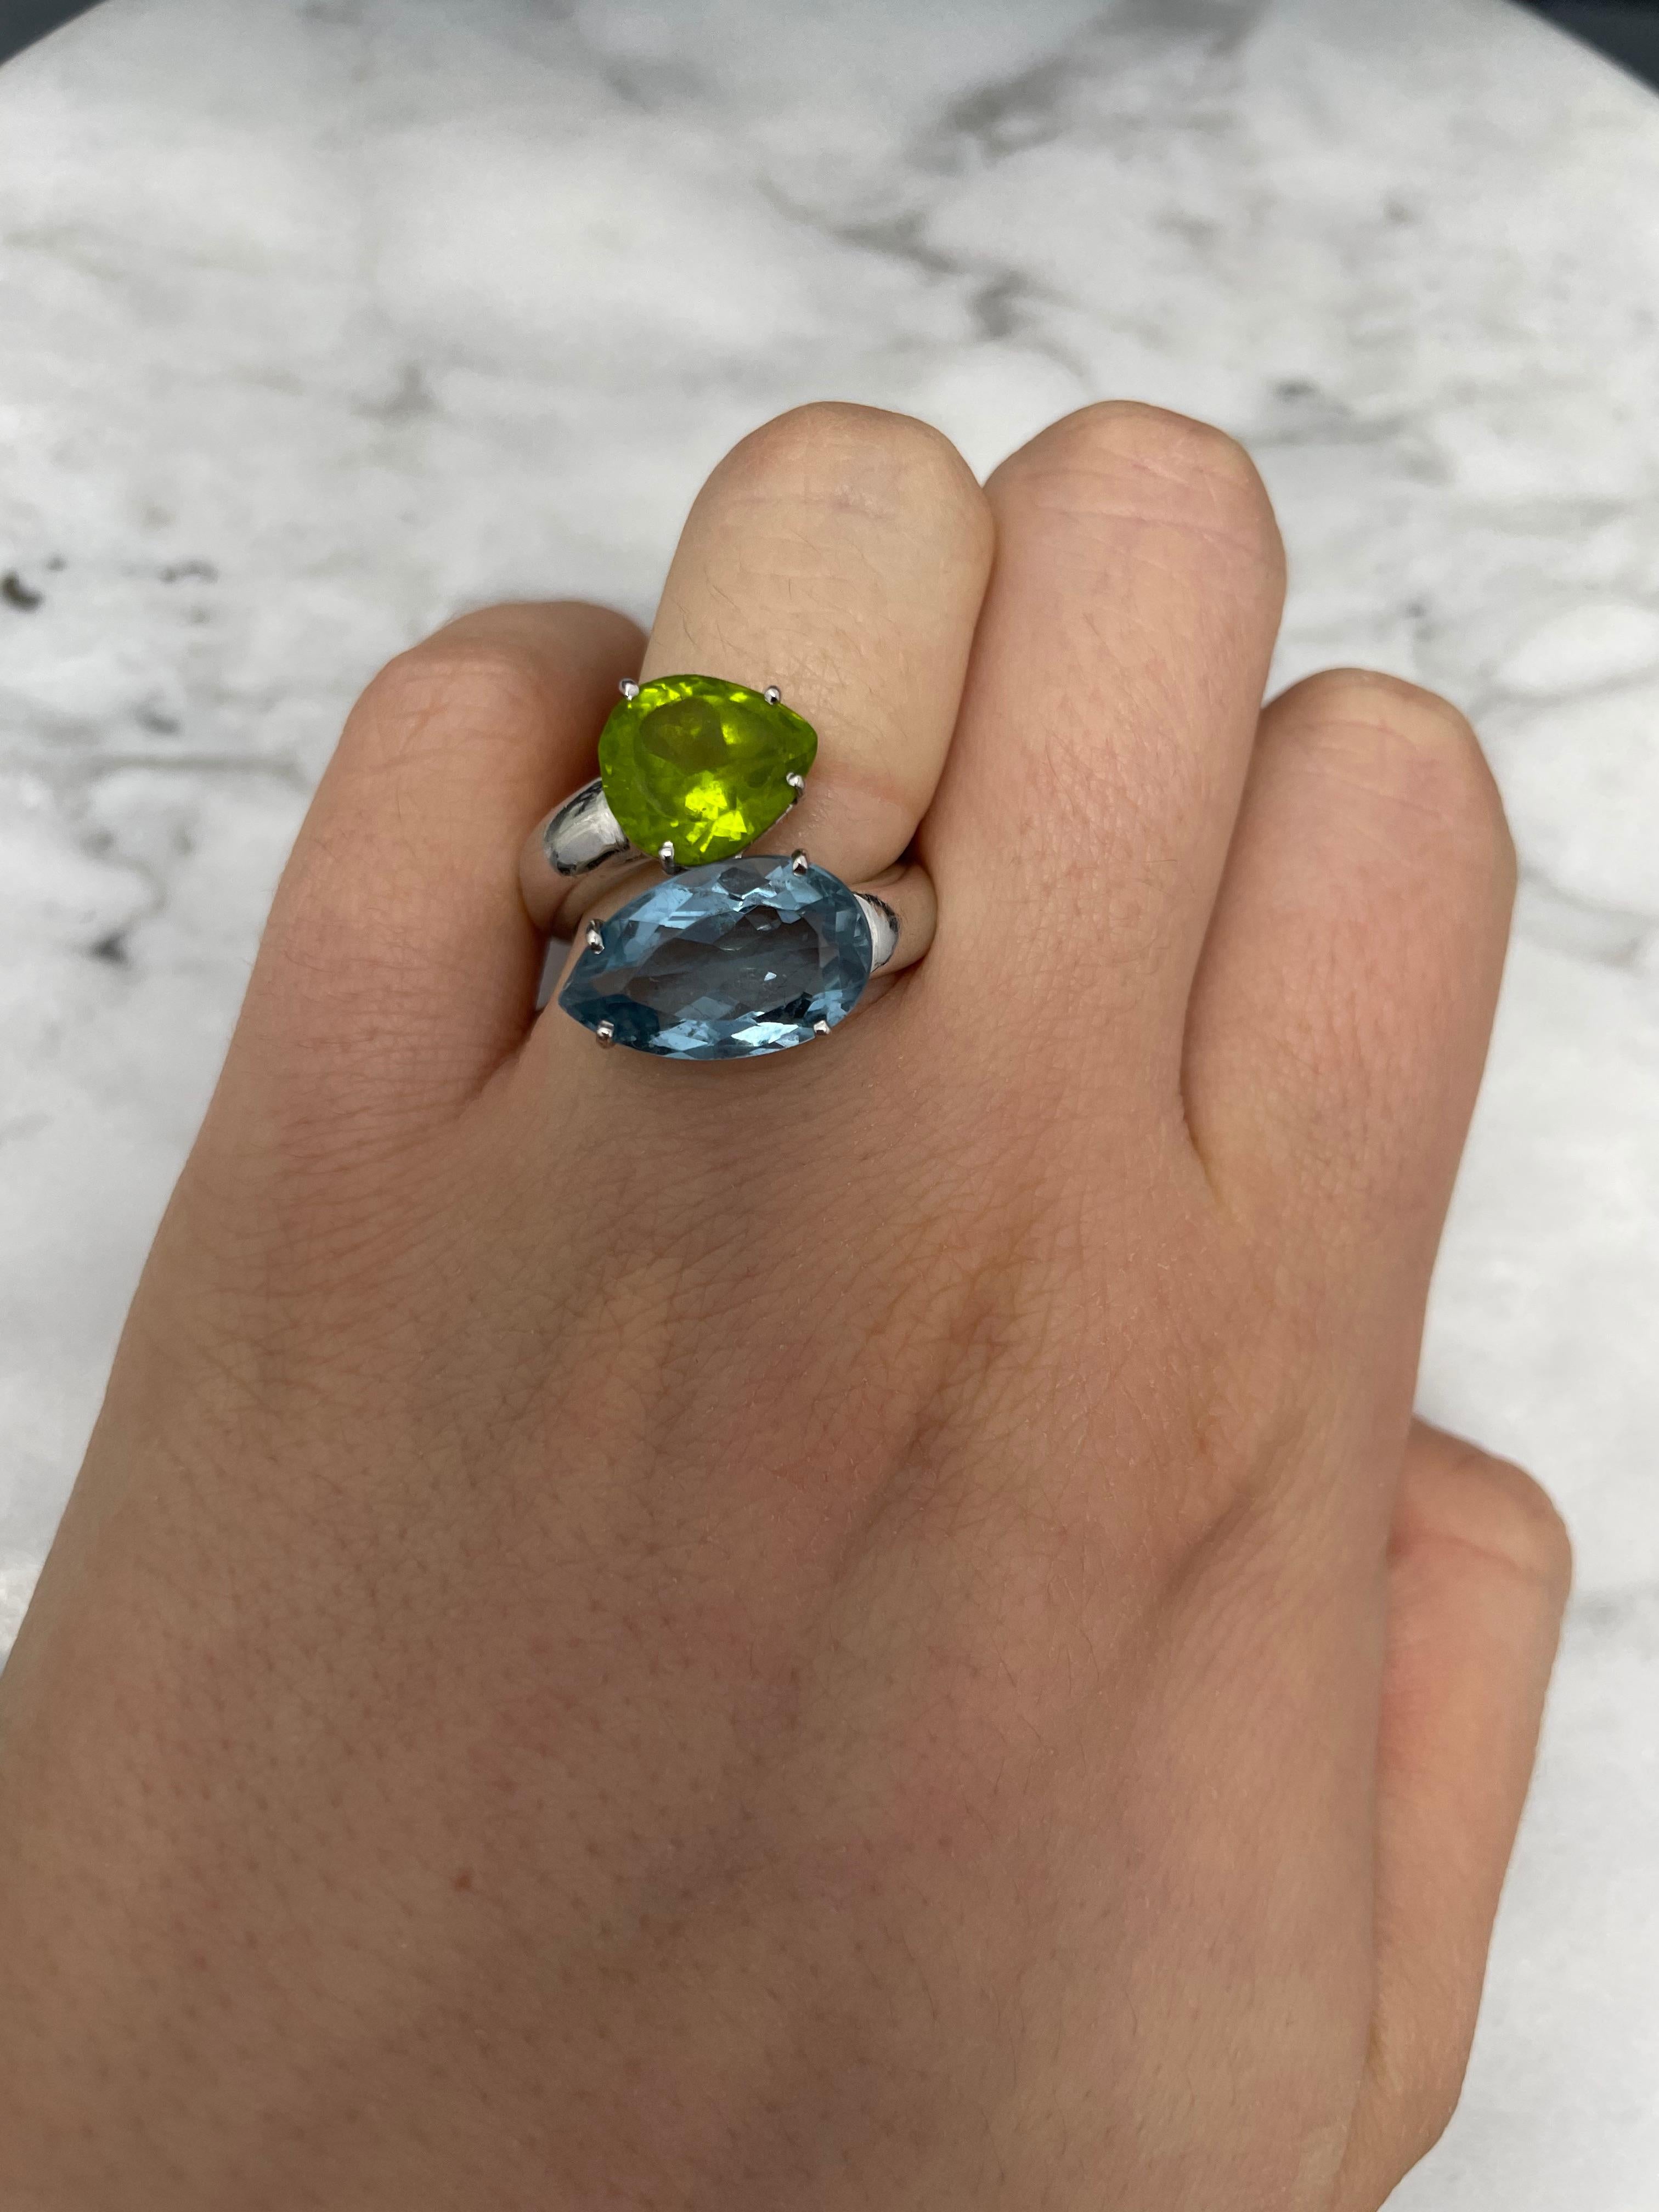 18K White Gold Pear cut Blue Topaz and Peridot Ring

Size 6.75

Grams 10.6